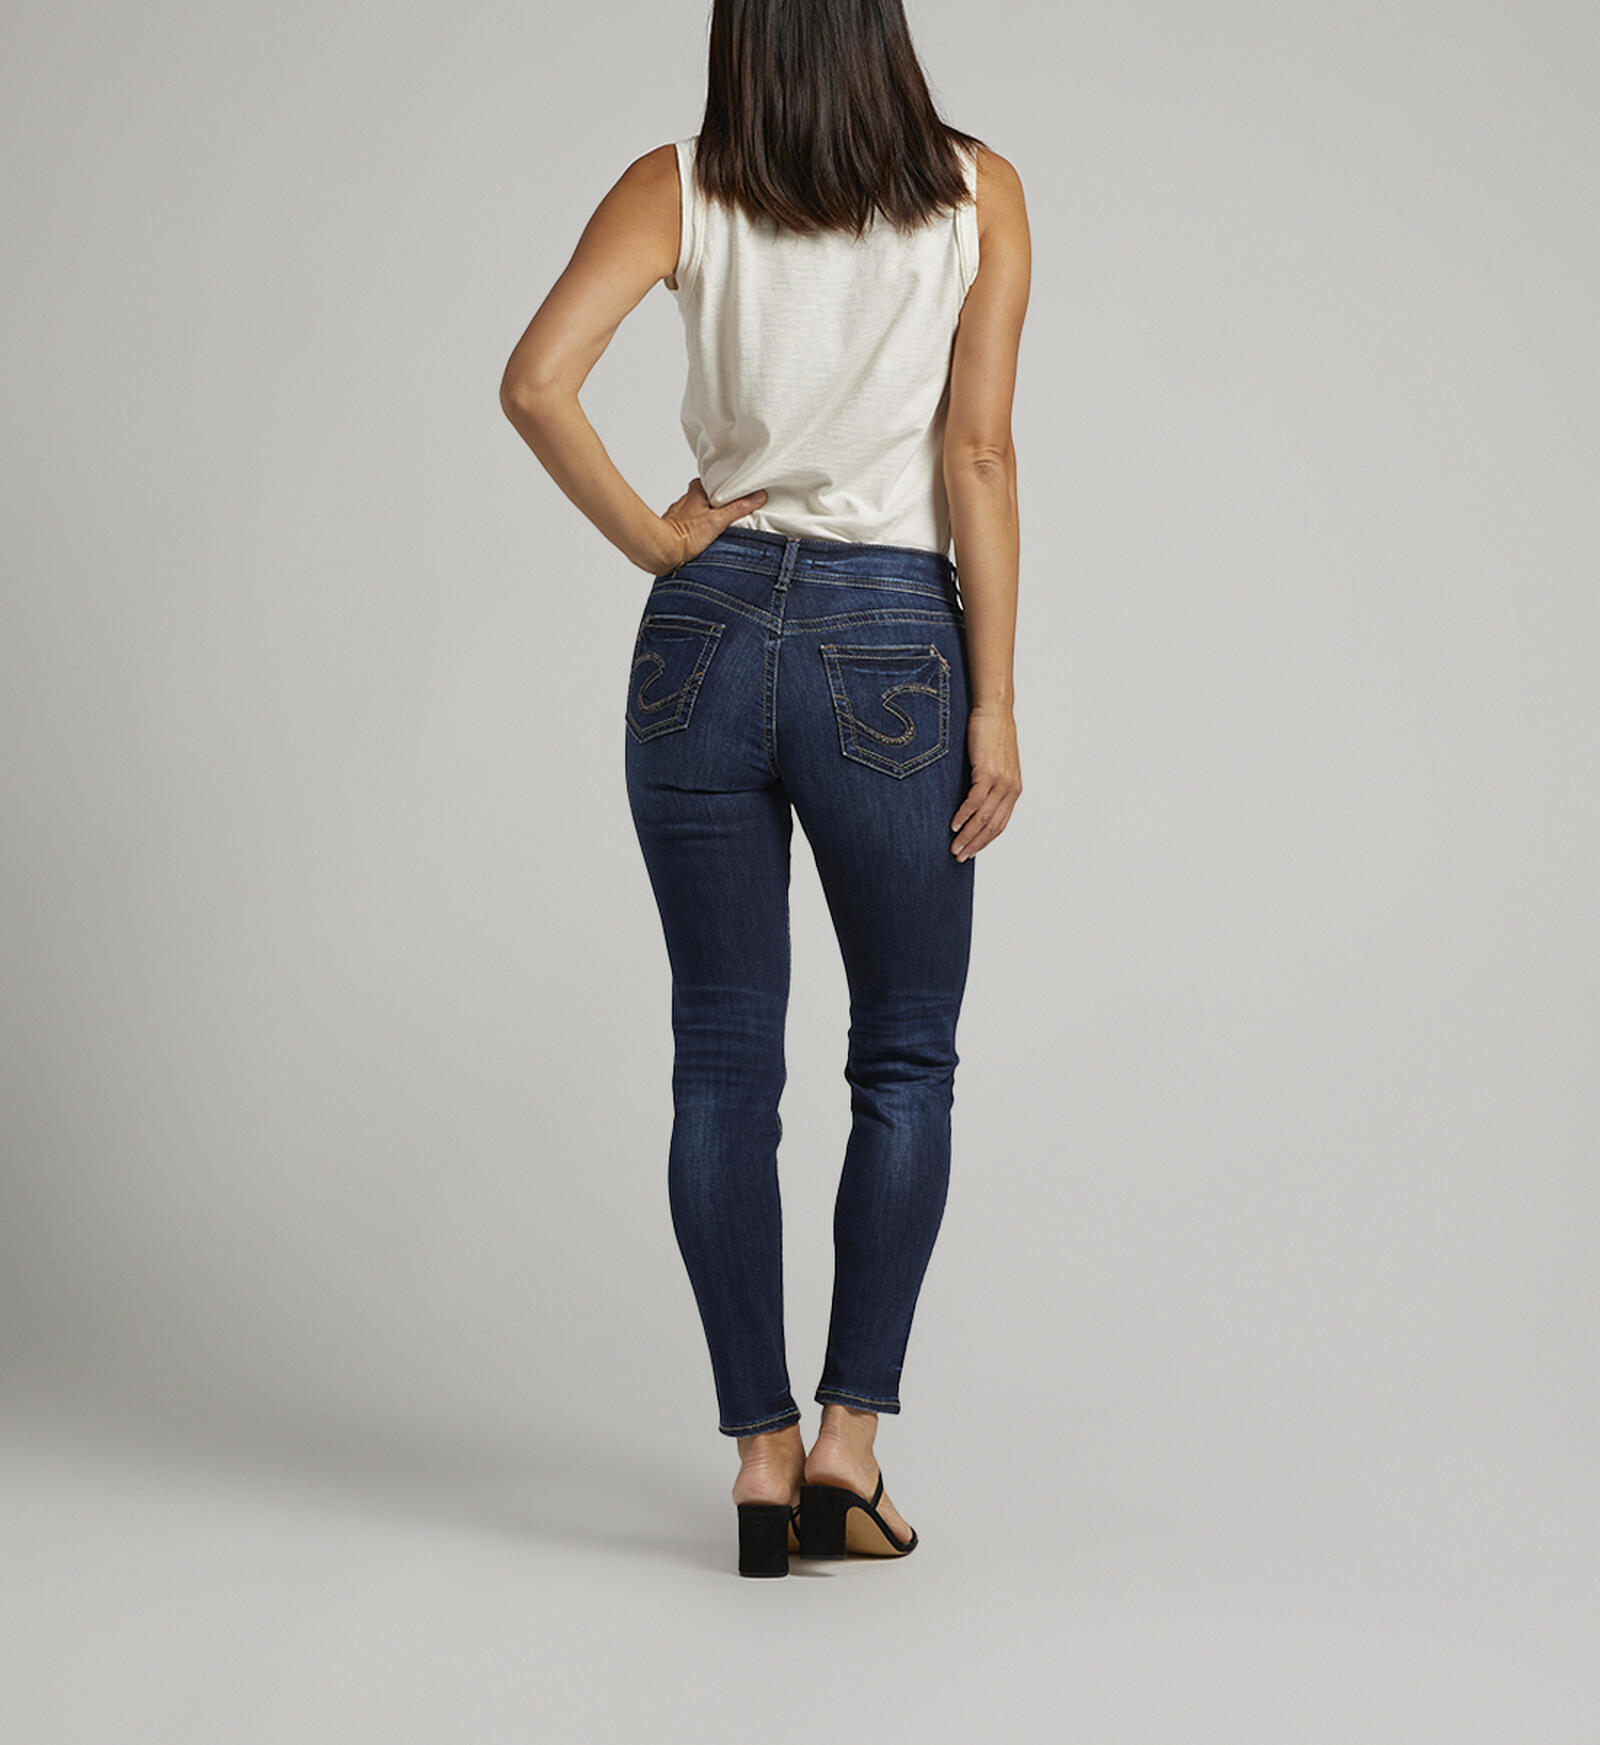 Buy Suki Mid Rise Skinny Jeans for USD 74.00